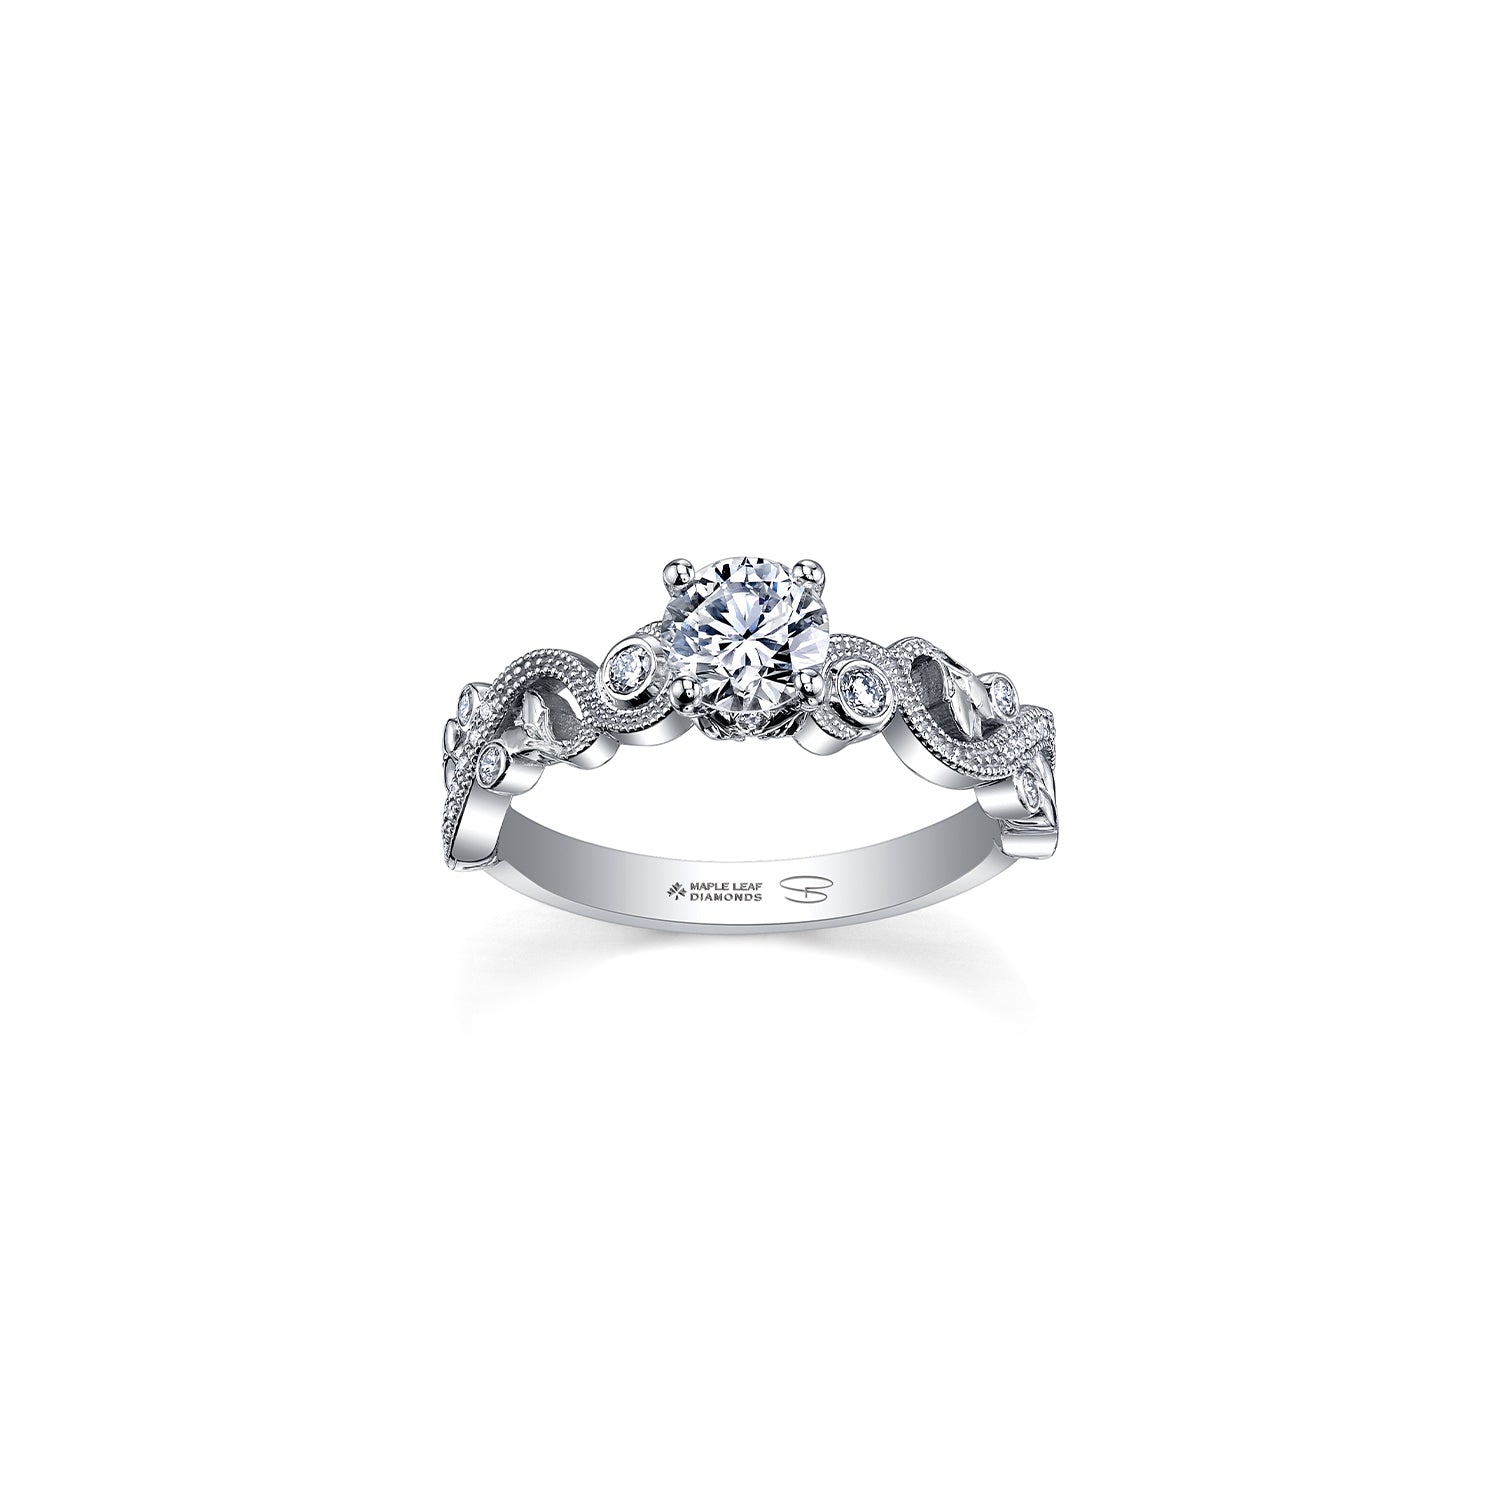 Crafted in white 18KT Canadian Certified Gold, this ring features a diamond set rose vine band cradling a round brilliant-cut Canadian centre diamond.